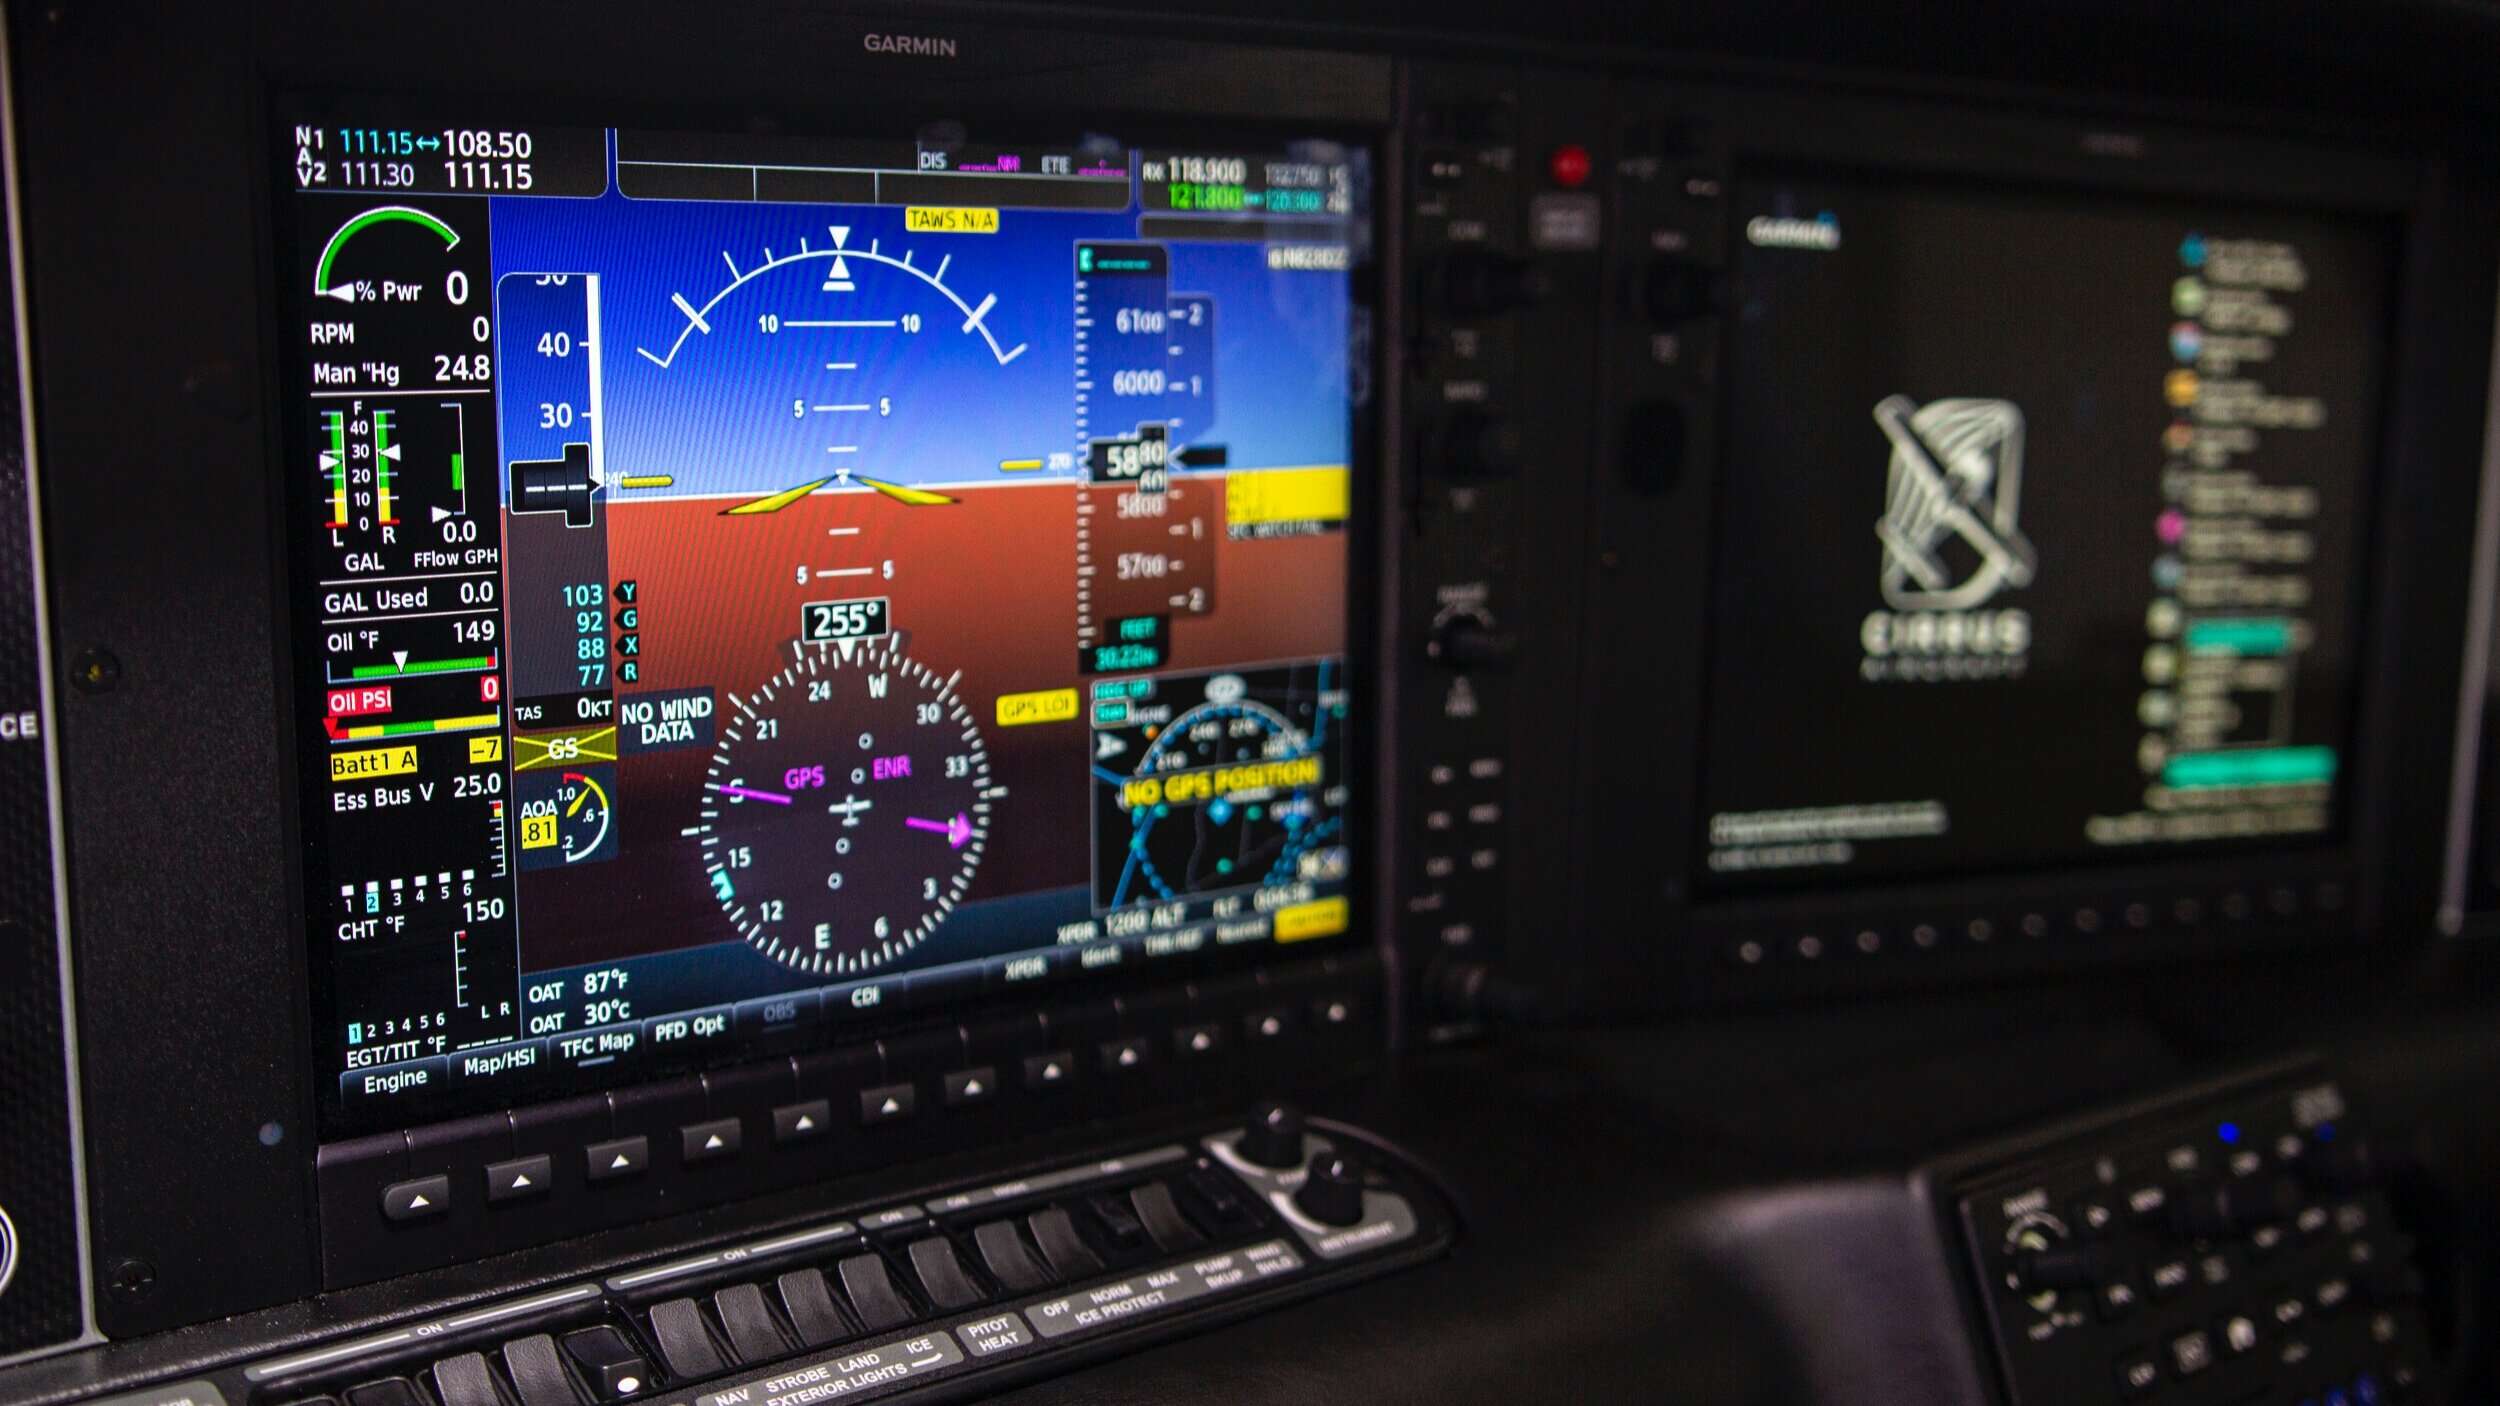 N828DZ | Garmin G1000 Perspective+ Primary Flight Display and Multi Function Displays are a proven industry staple.